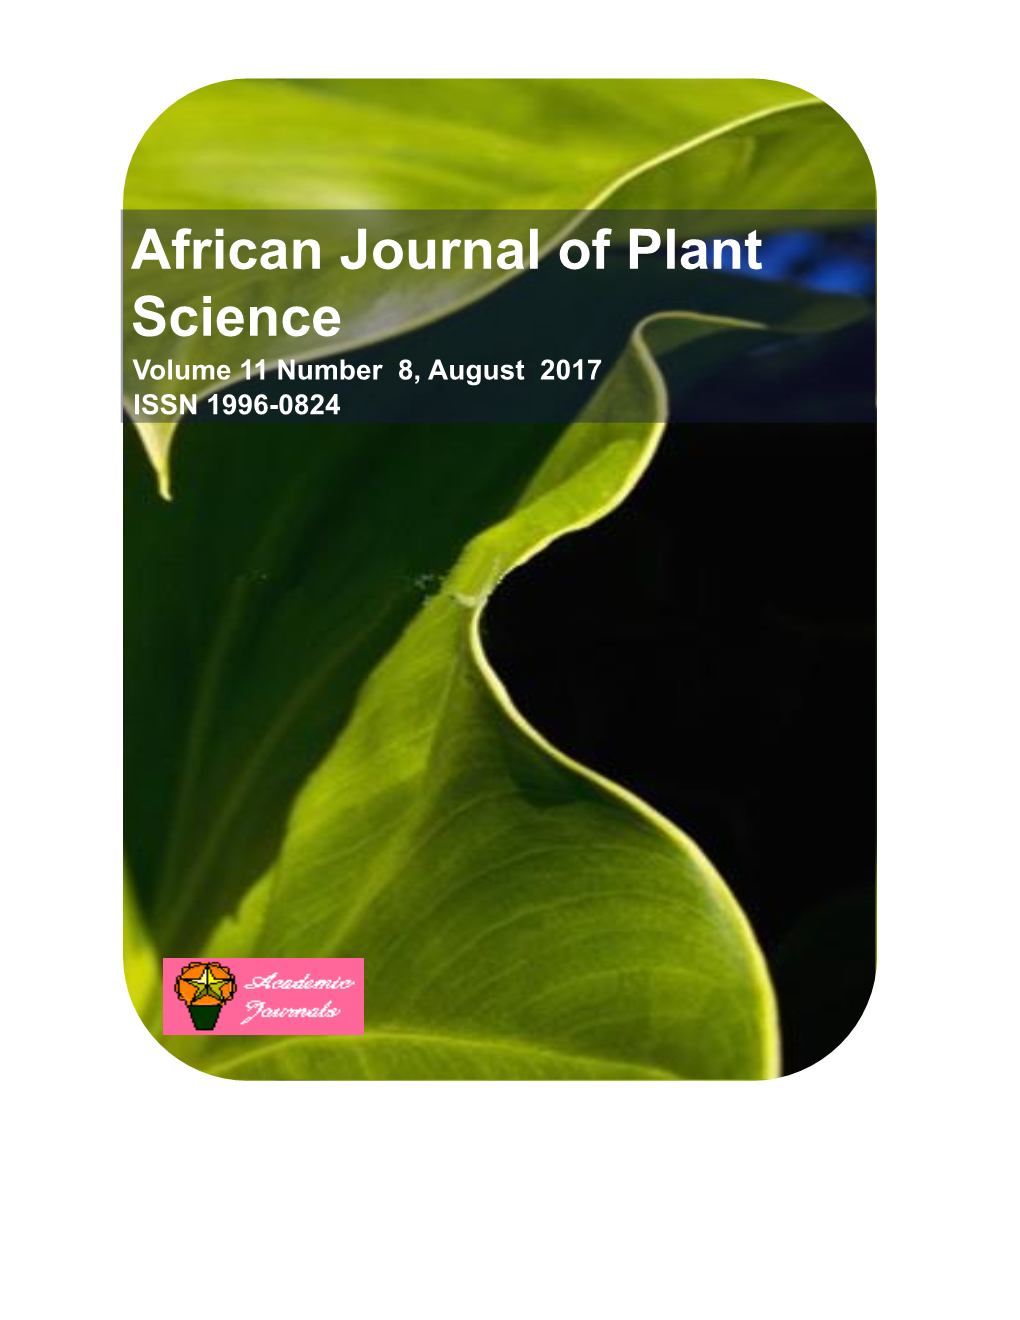 African Journal of Plant Science Volume 11 Number 8, August 2017 ISSN 1996-0824